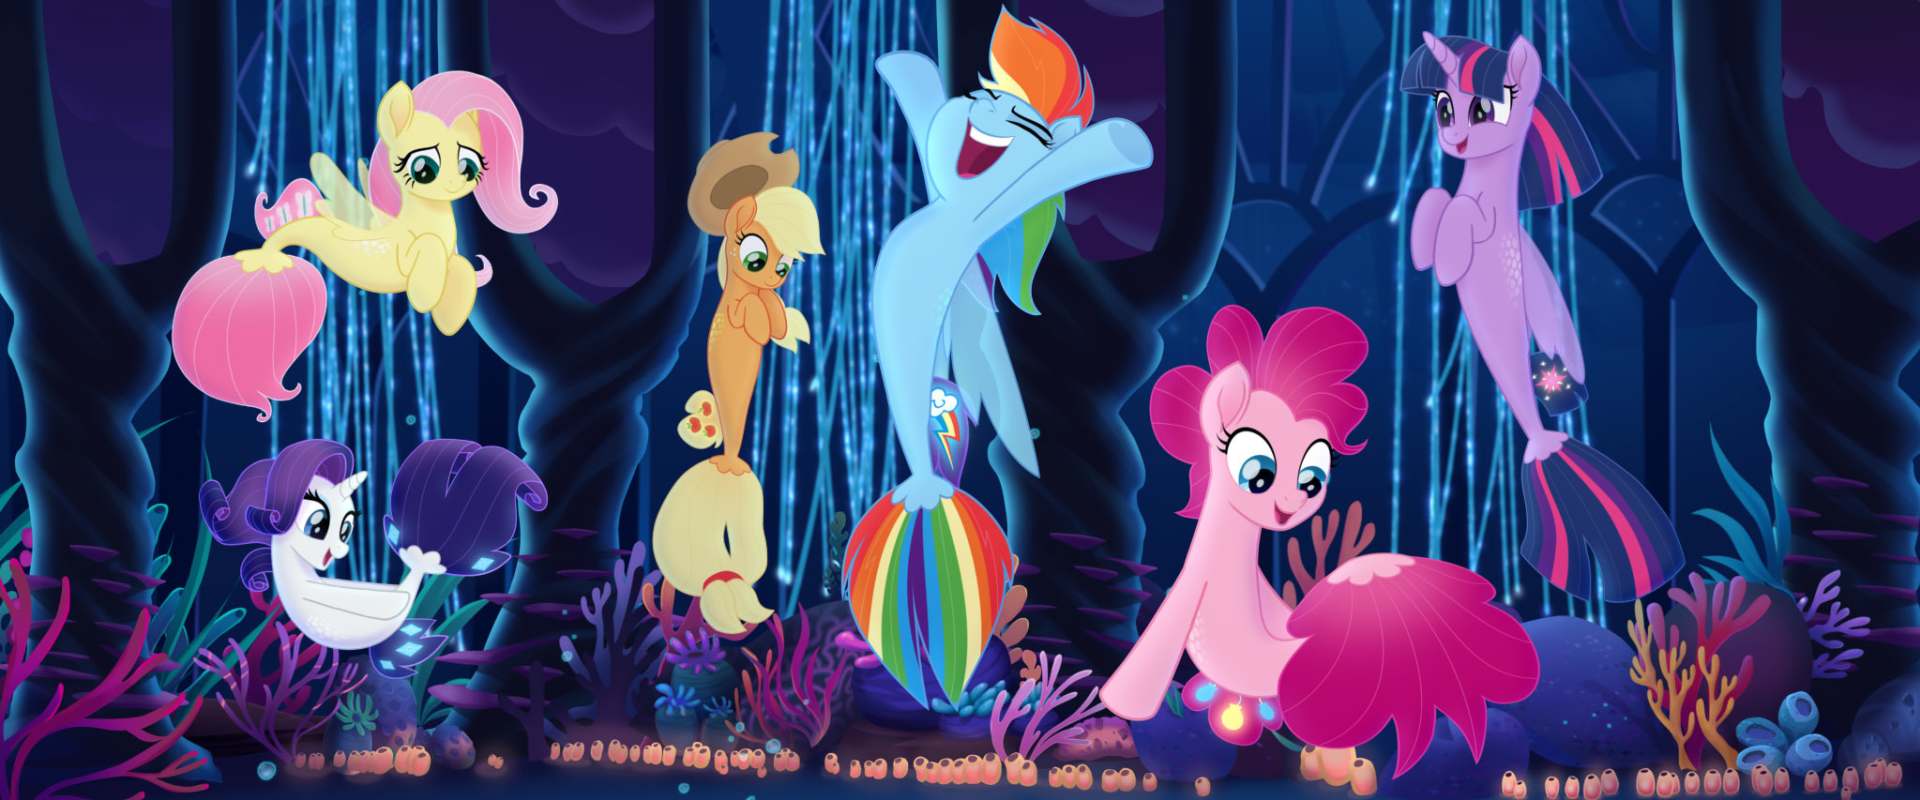 My Little Pony: The Movie background 2